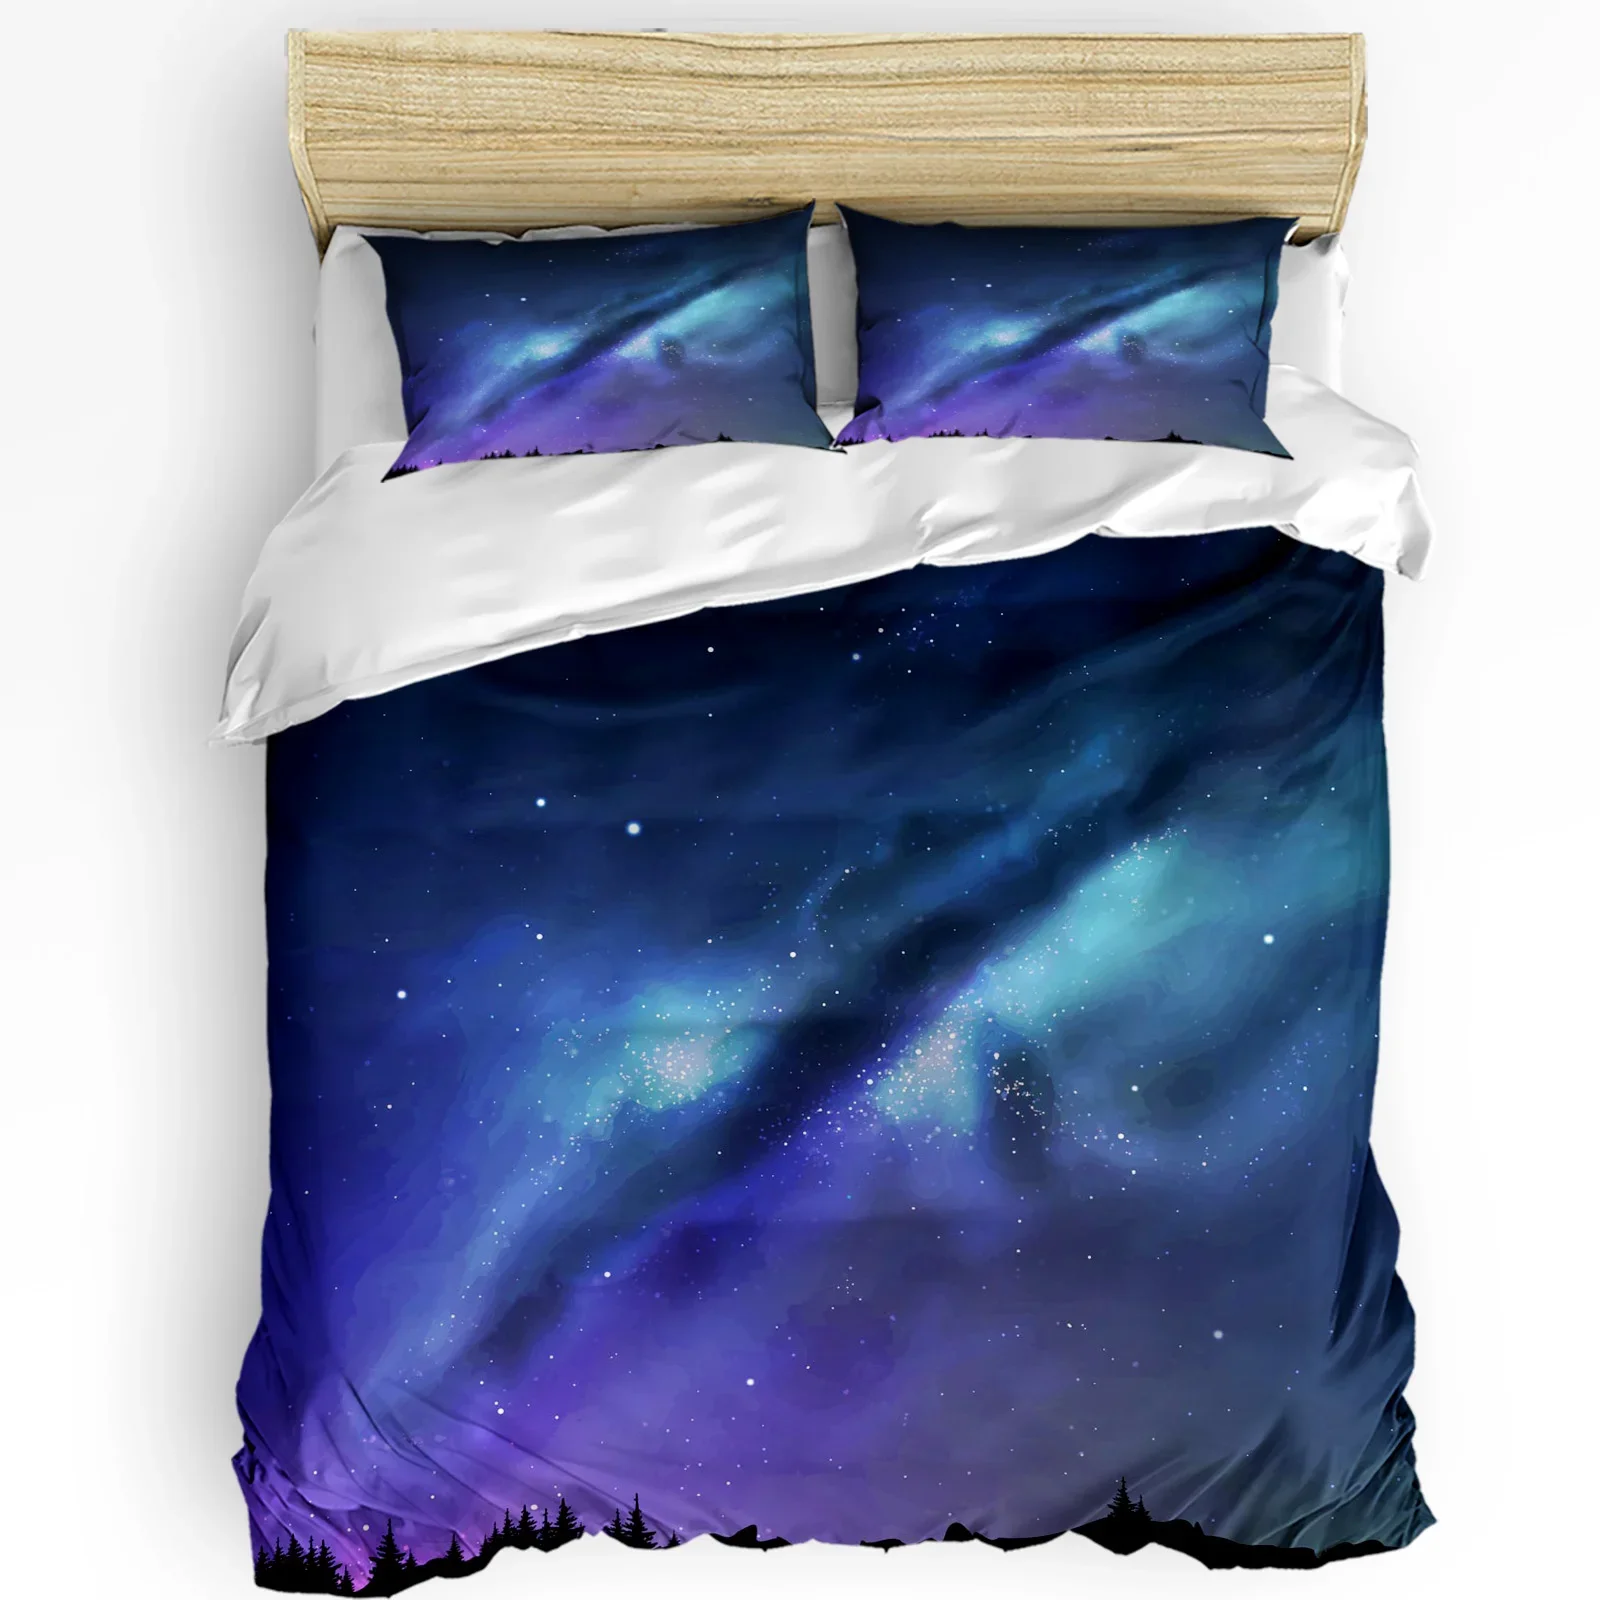 

Starry Sky Milky Way Night Stars 3pcs Bedding Set For Bedroom Double Bed Home Textile Duvet Cover Quilt Cover Pillowcase